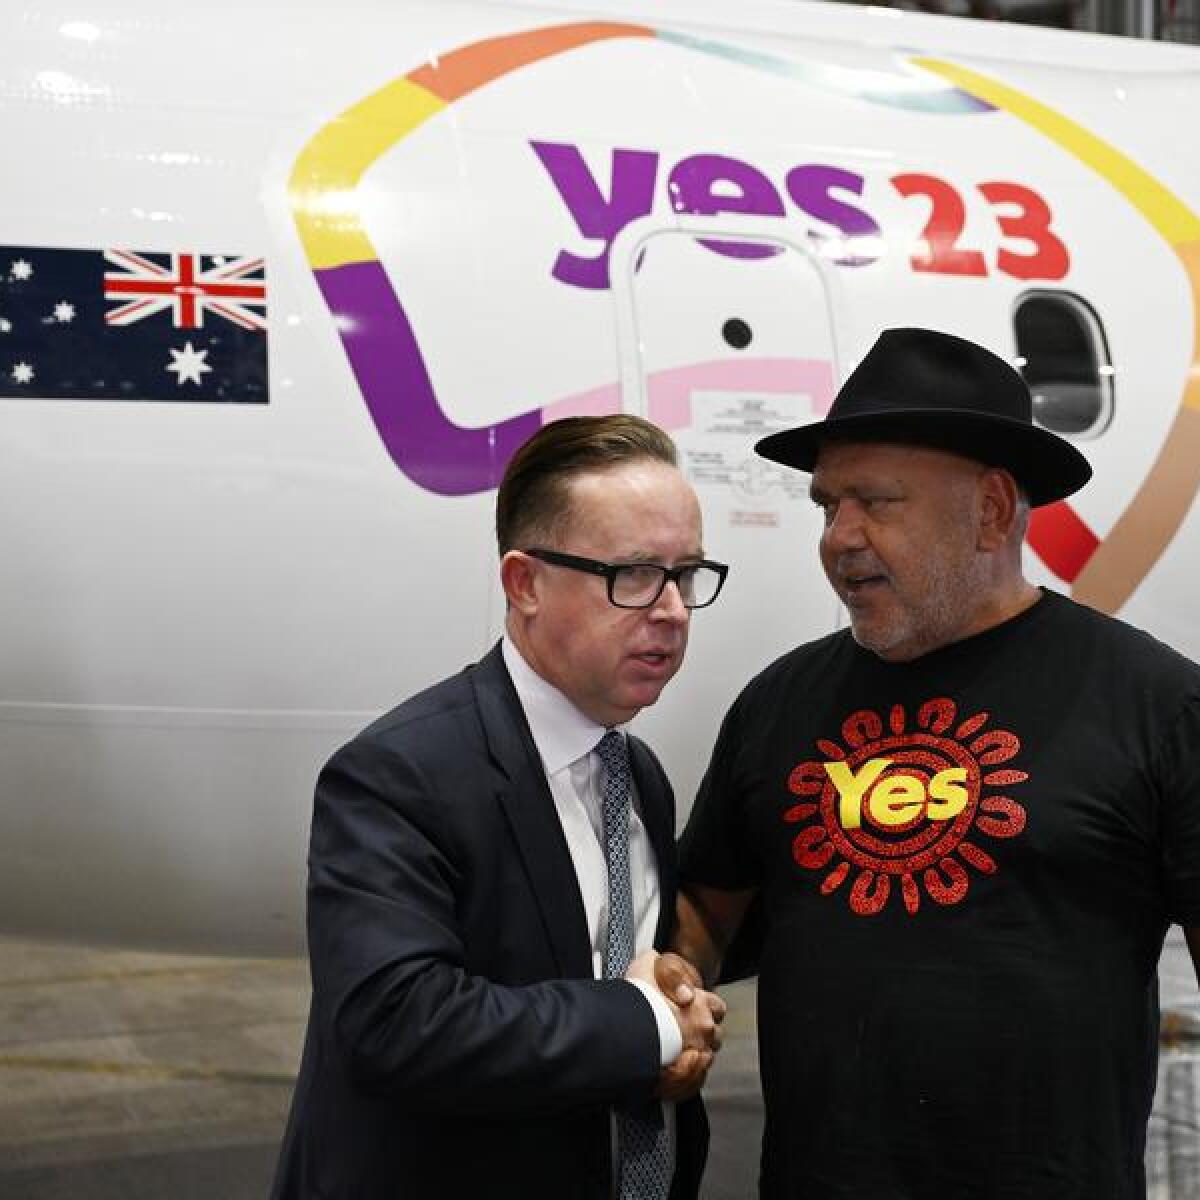 Alan Joyce and Noel Pearson in front of a plane painted with Yes 23.